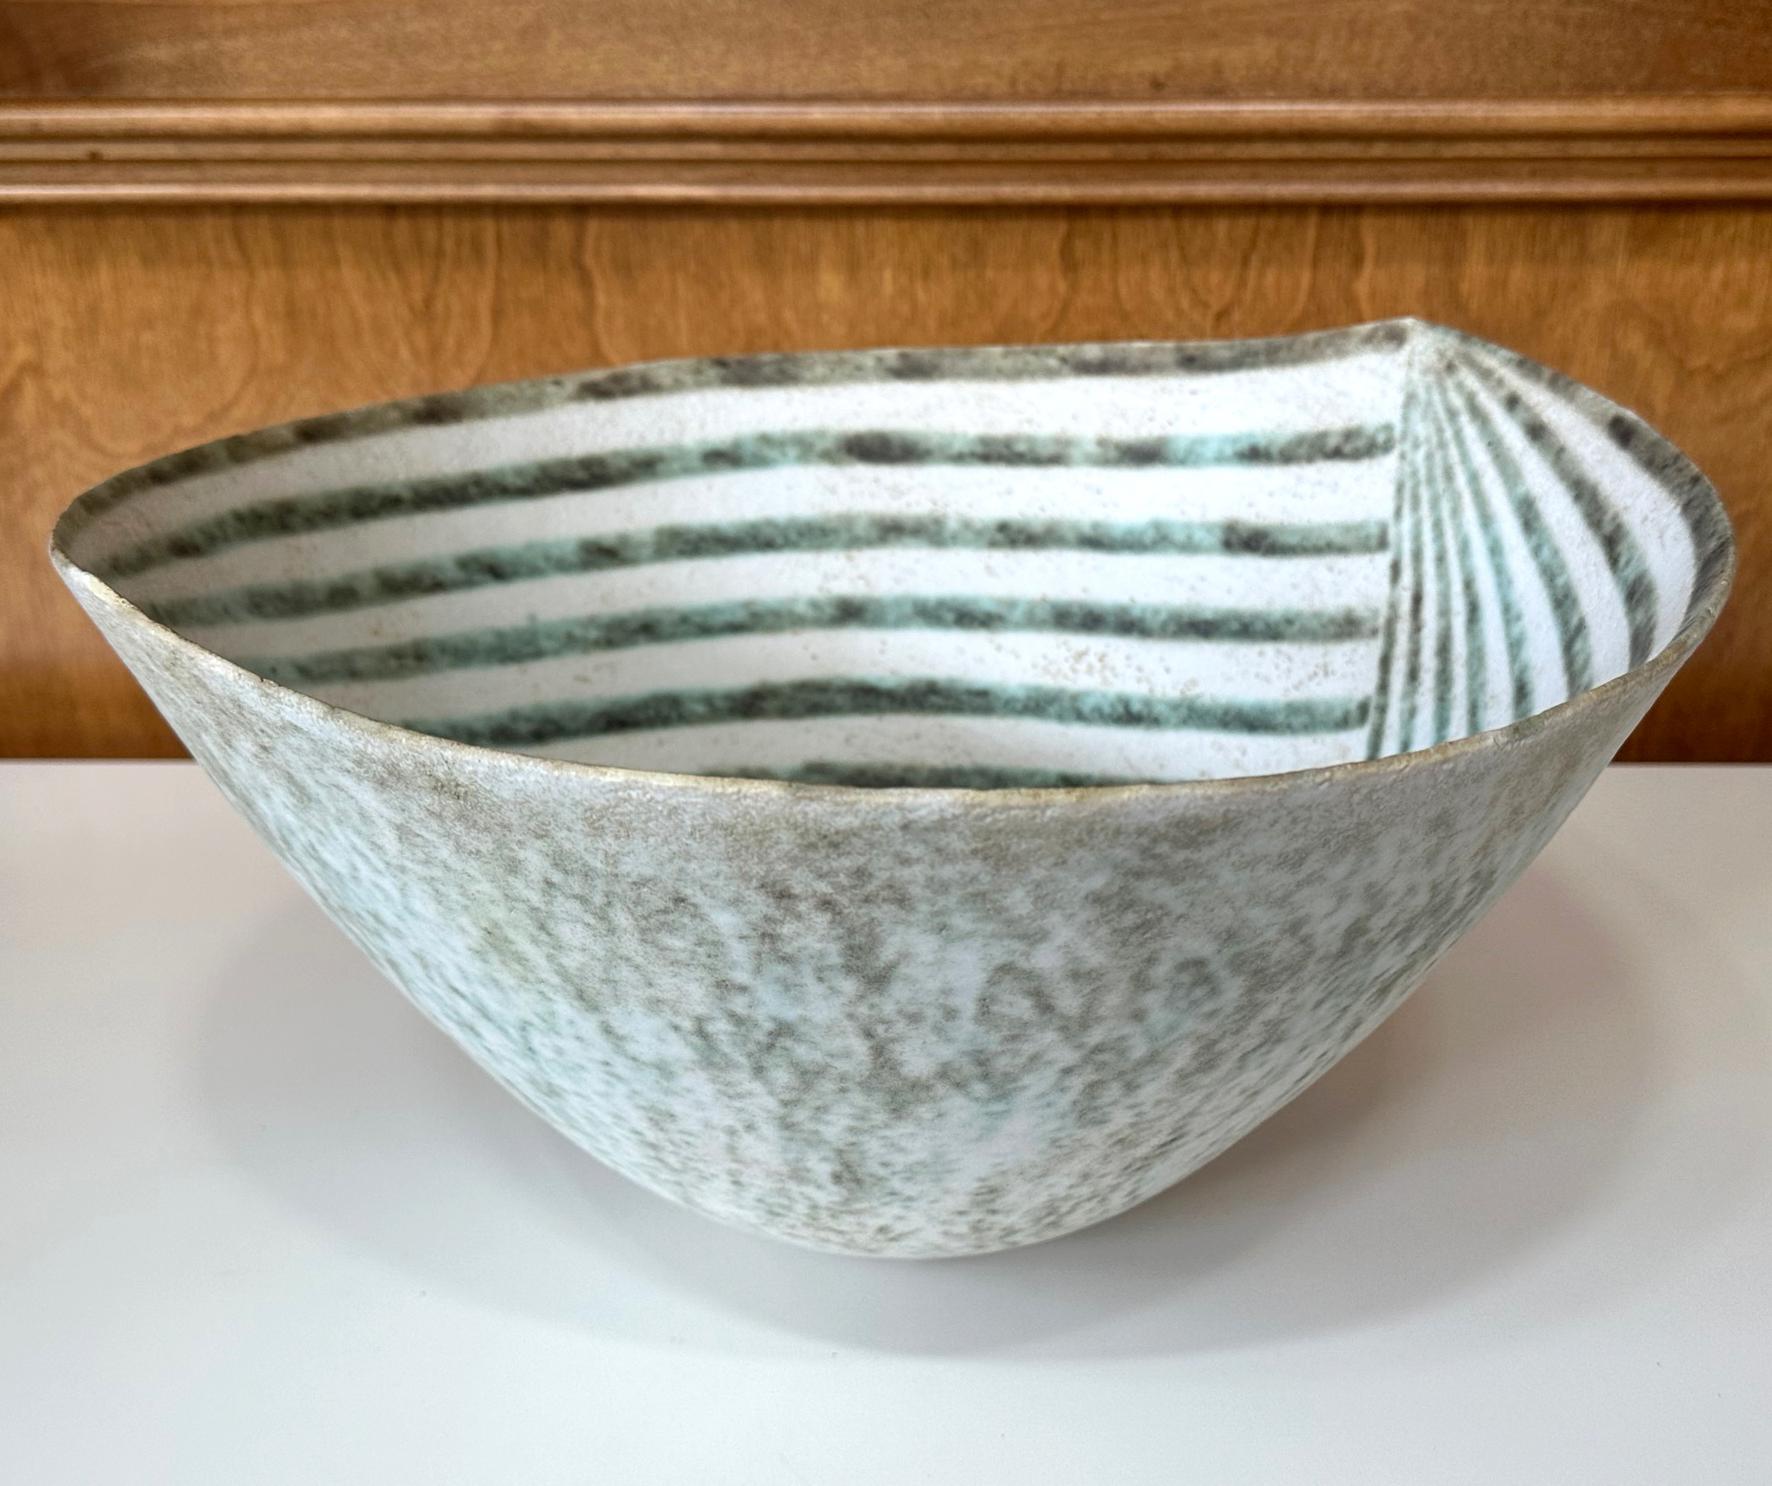 A large stoneware glazed bowl in a rare leaf form by British studio potter John Ward (1938-2023) circa last quarter of the 20th century. The impressive, oversized bowl features a distinct leaf-shape along the contour of the opening. The interior